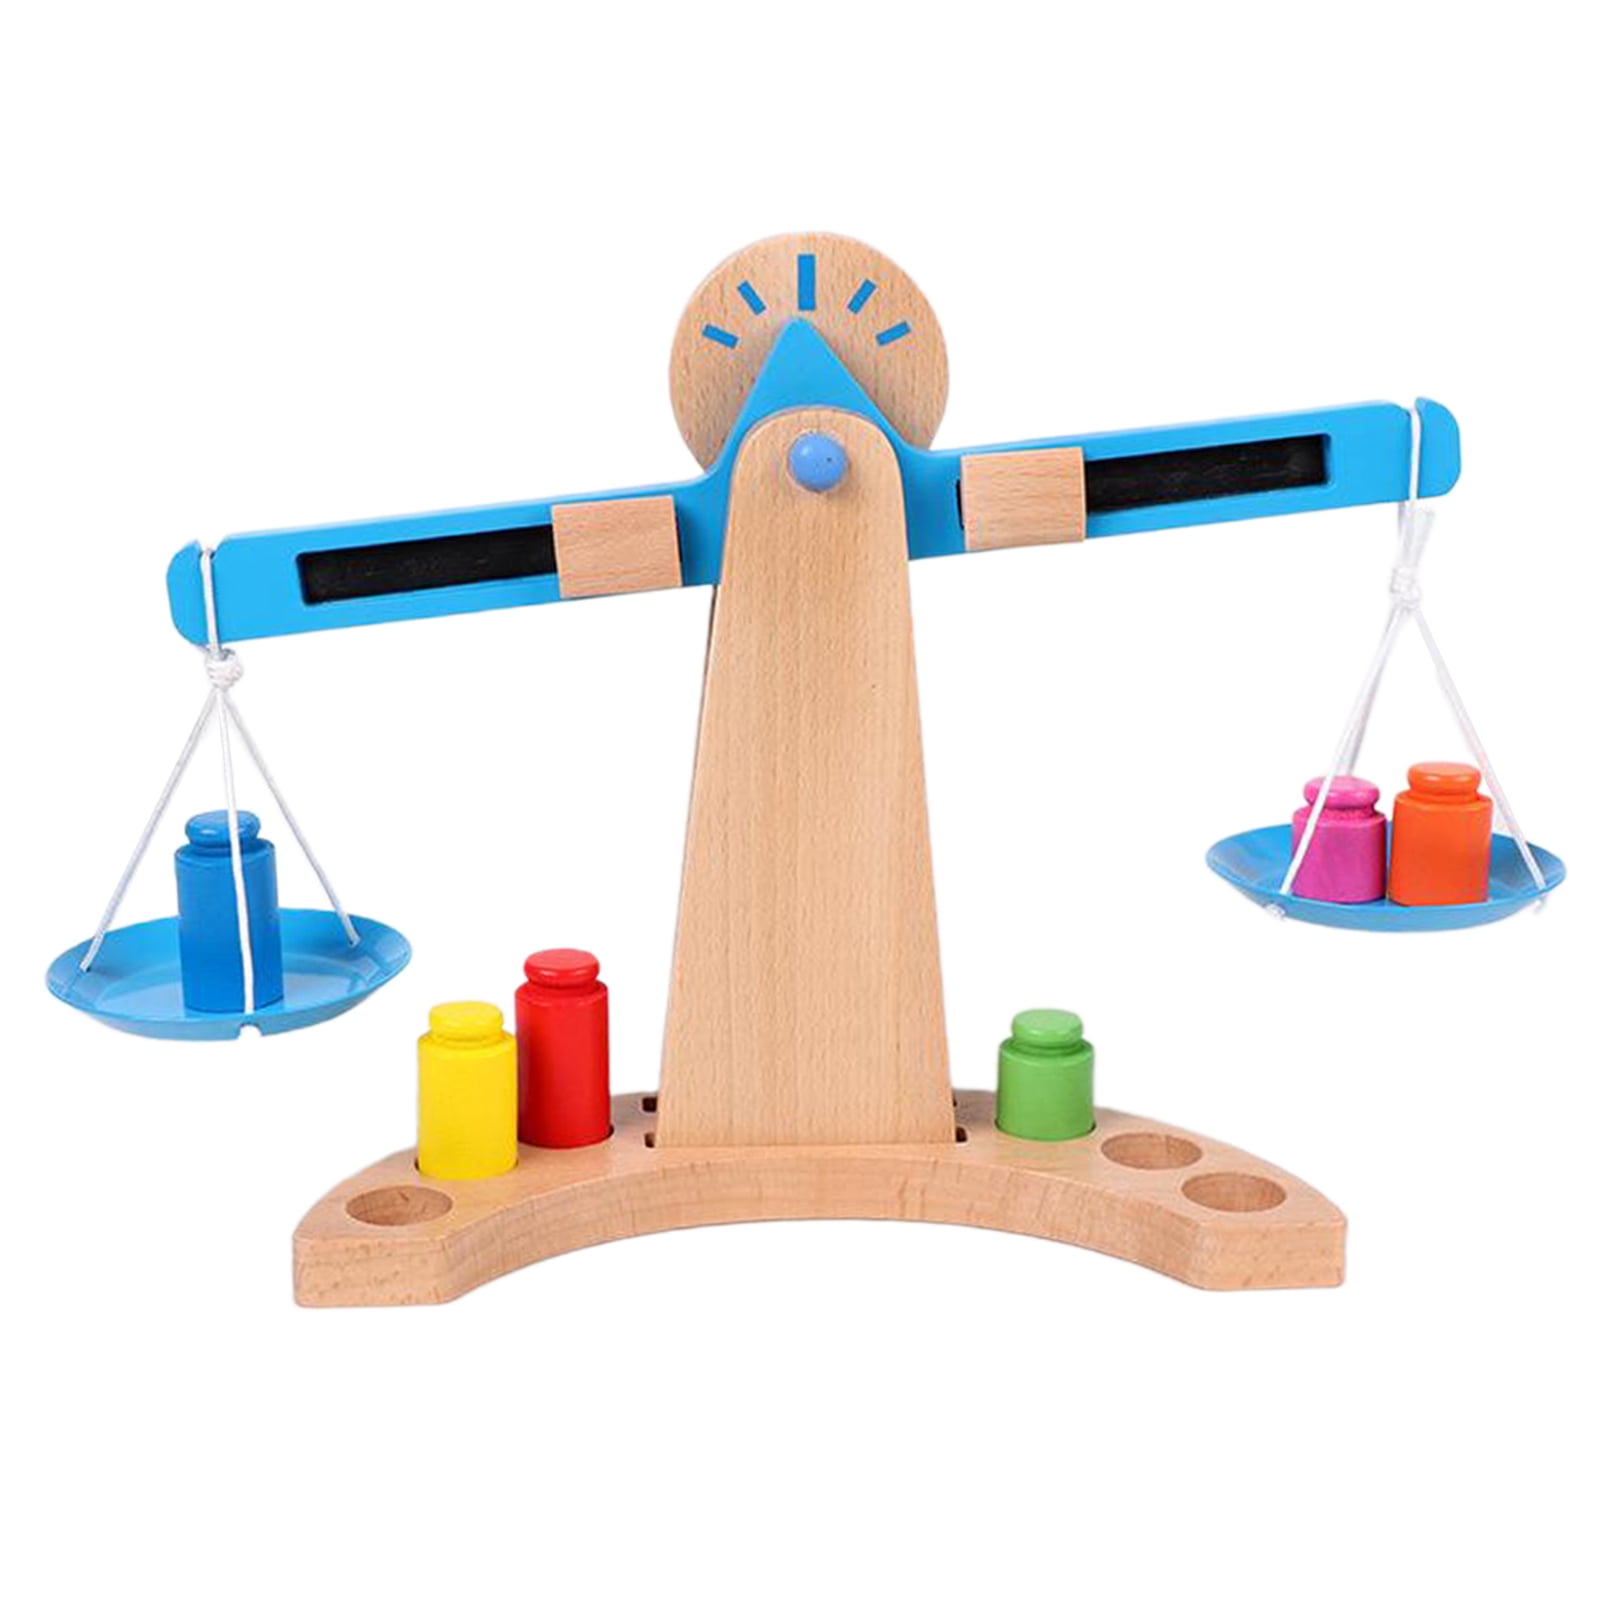 Wooden Balance Weighing Scale Preschool Education Math Learning Toy for Kids 